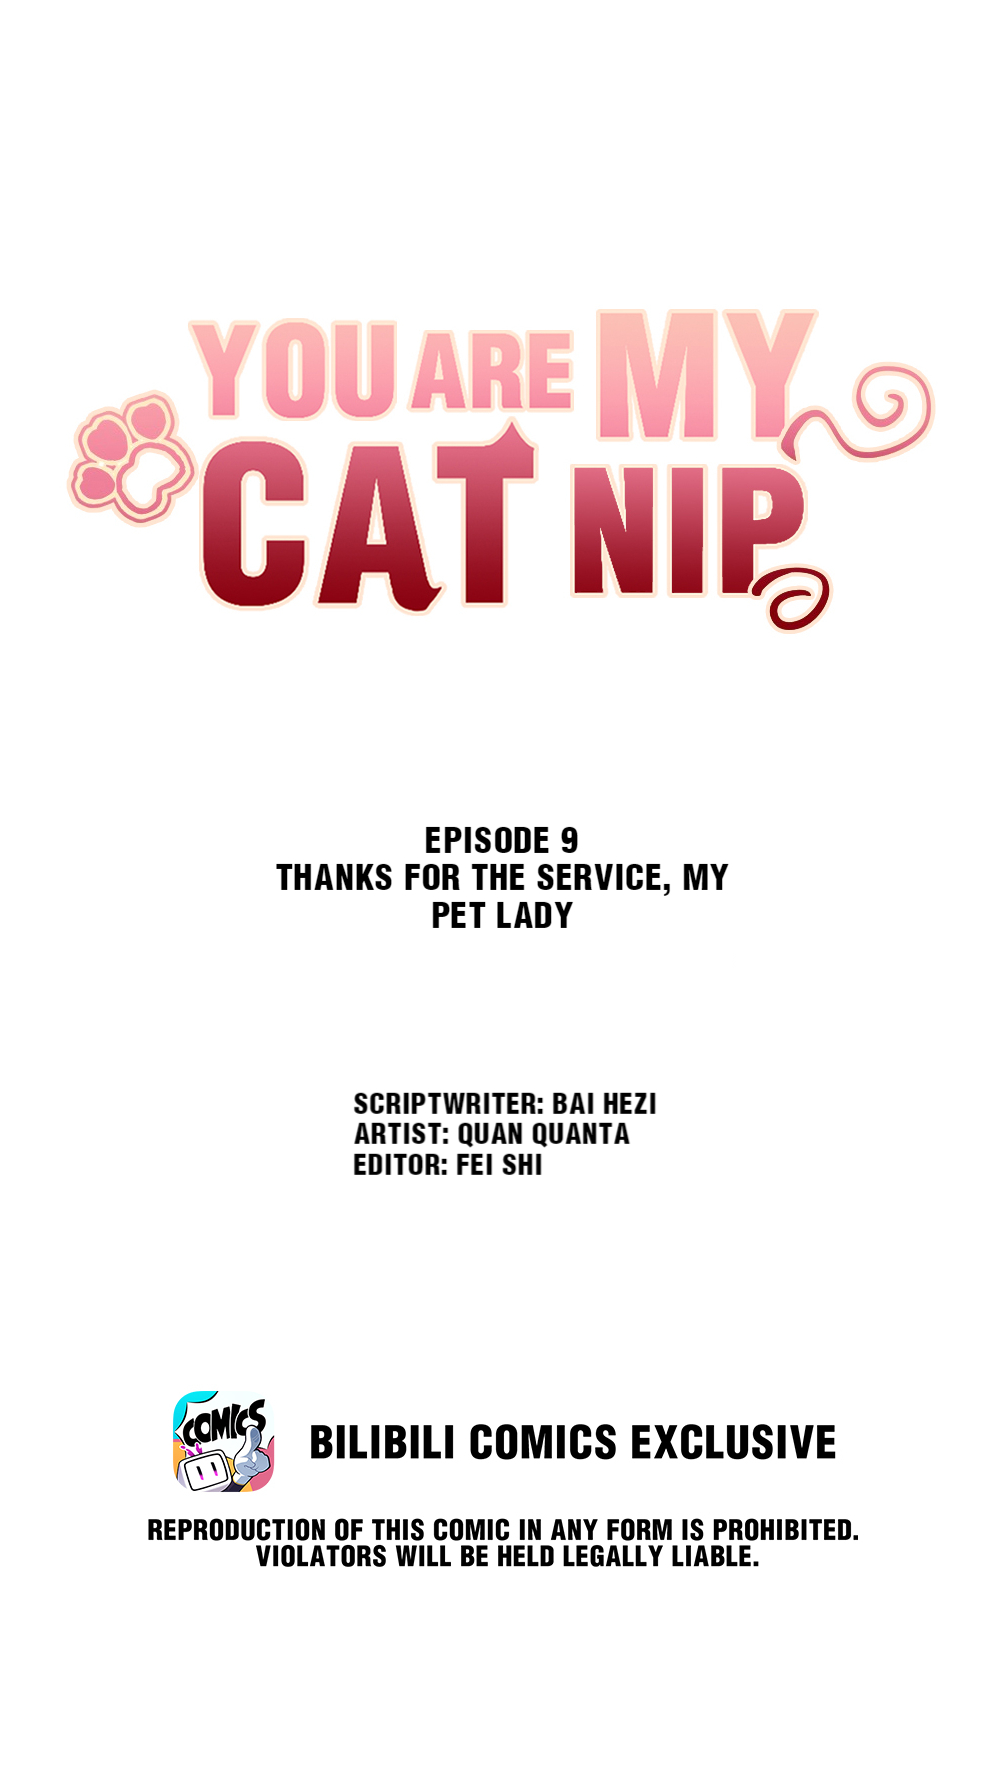 You Are My Catnip 9 Thanks For The Service, My Pet Lady